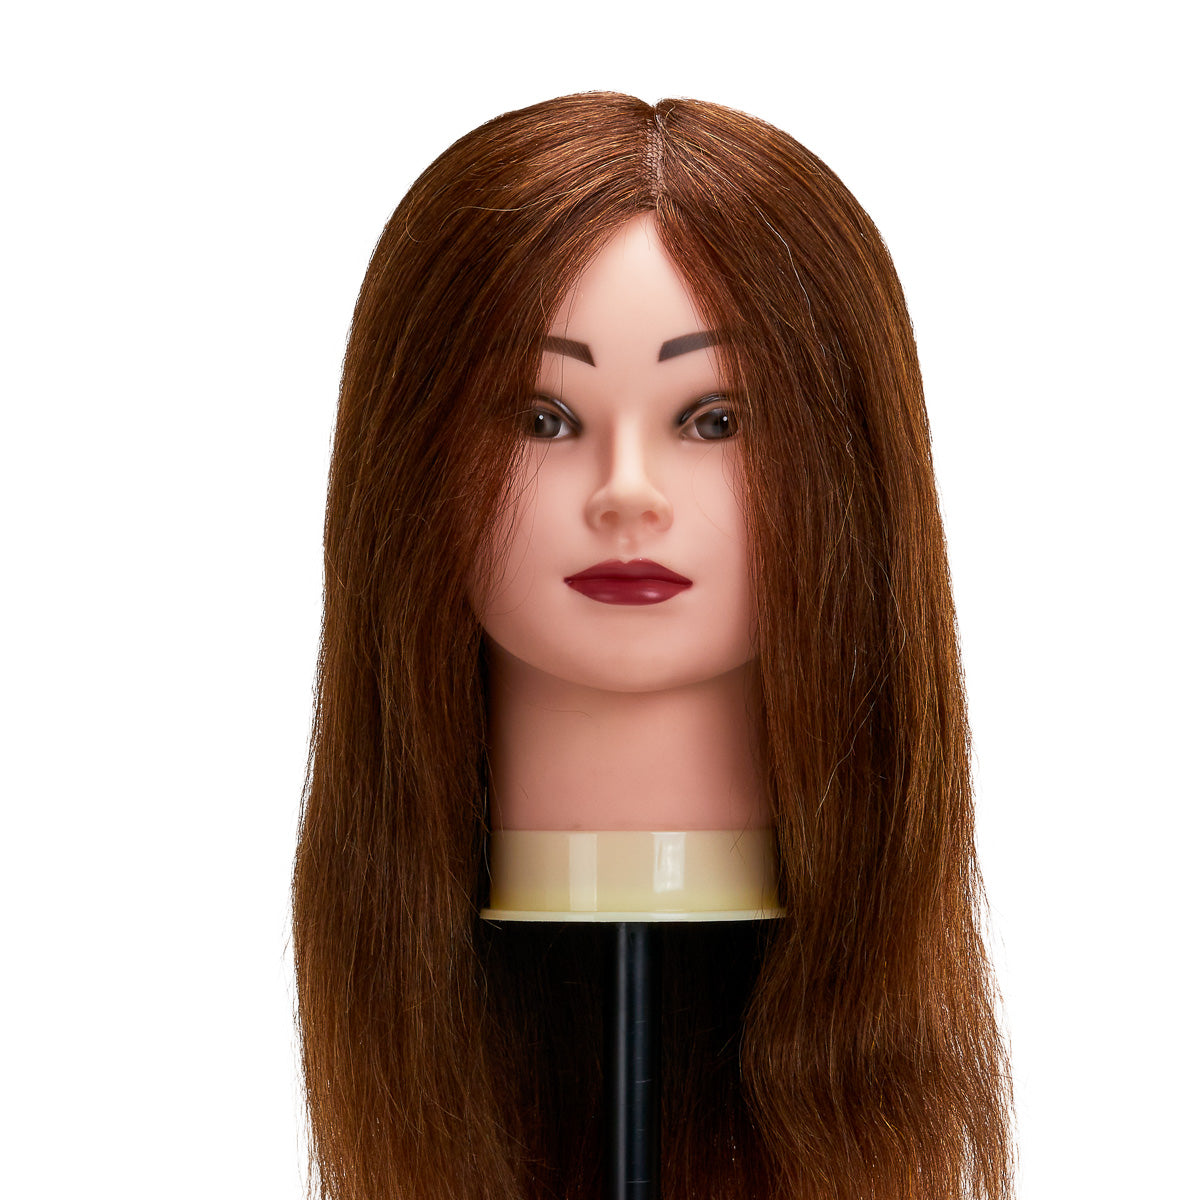 Gabbiano WZ1 Hairdressing Training Head with Real Hair, Color 4#, Length 20" 